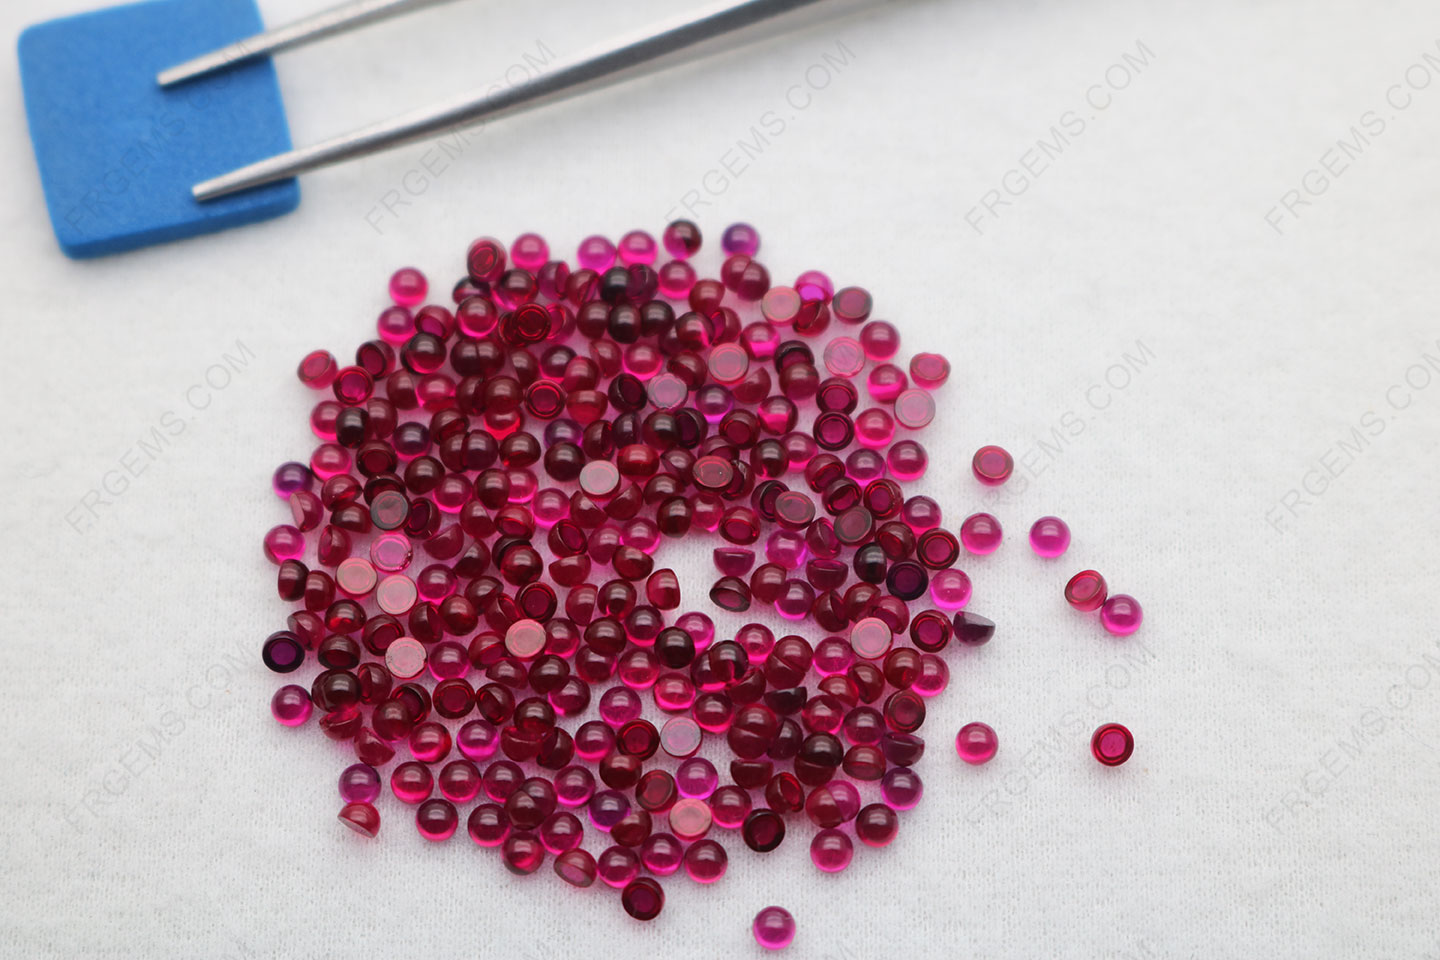 Synthetic Corundum Ruby Red Deep Pigeon blood red Round Cabochon 2.5mm gemstones bulk wholesale